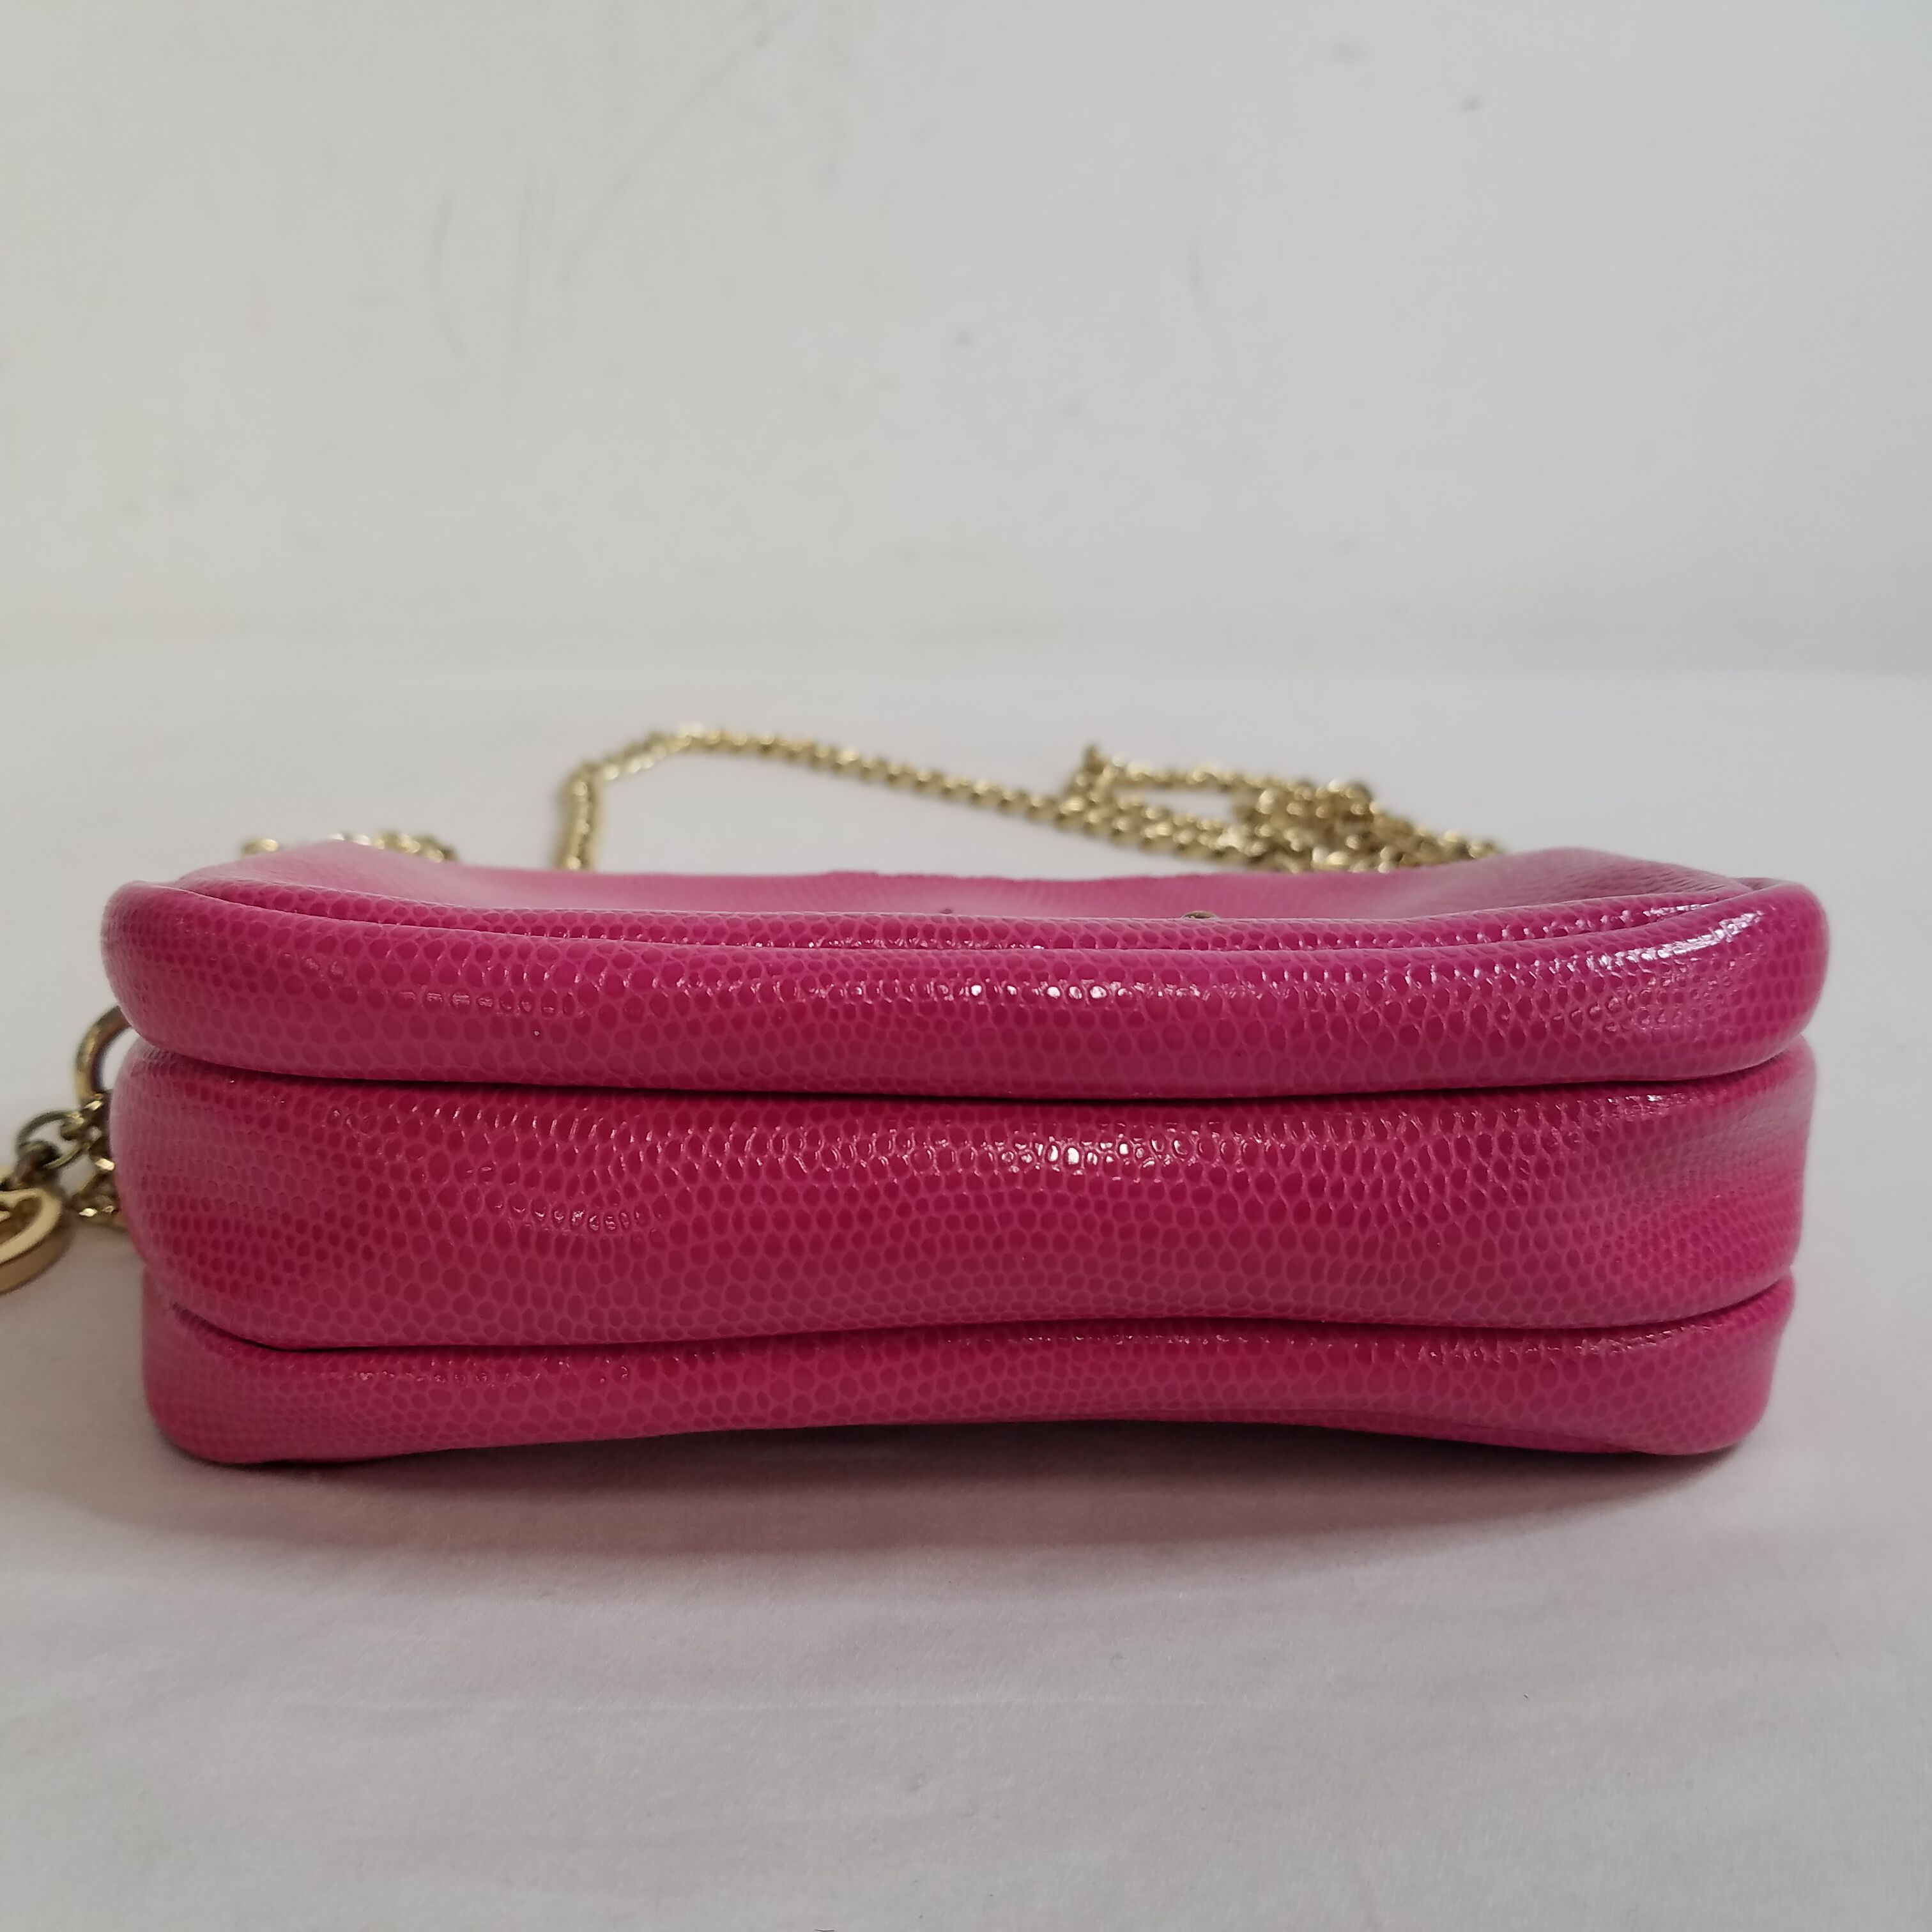 Juicy Couture | Bags | Juicy Couture Hot Pink Purse | Poshmark